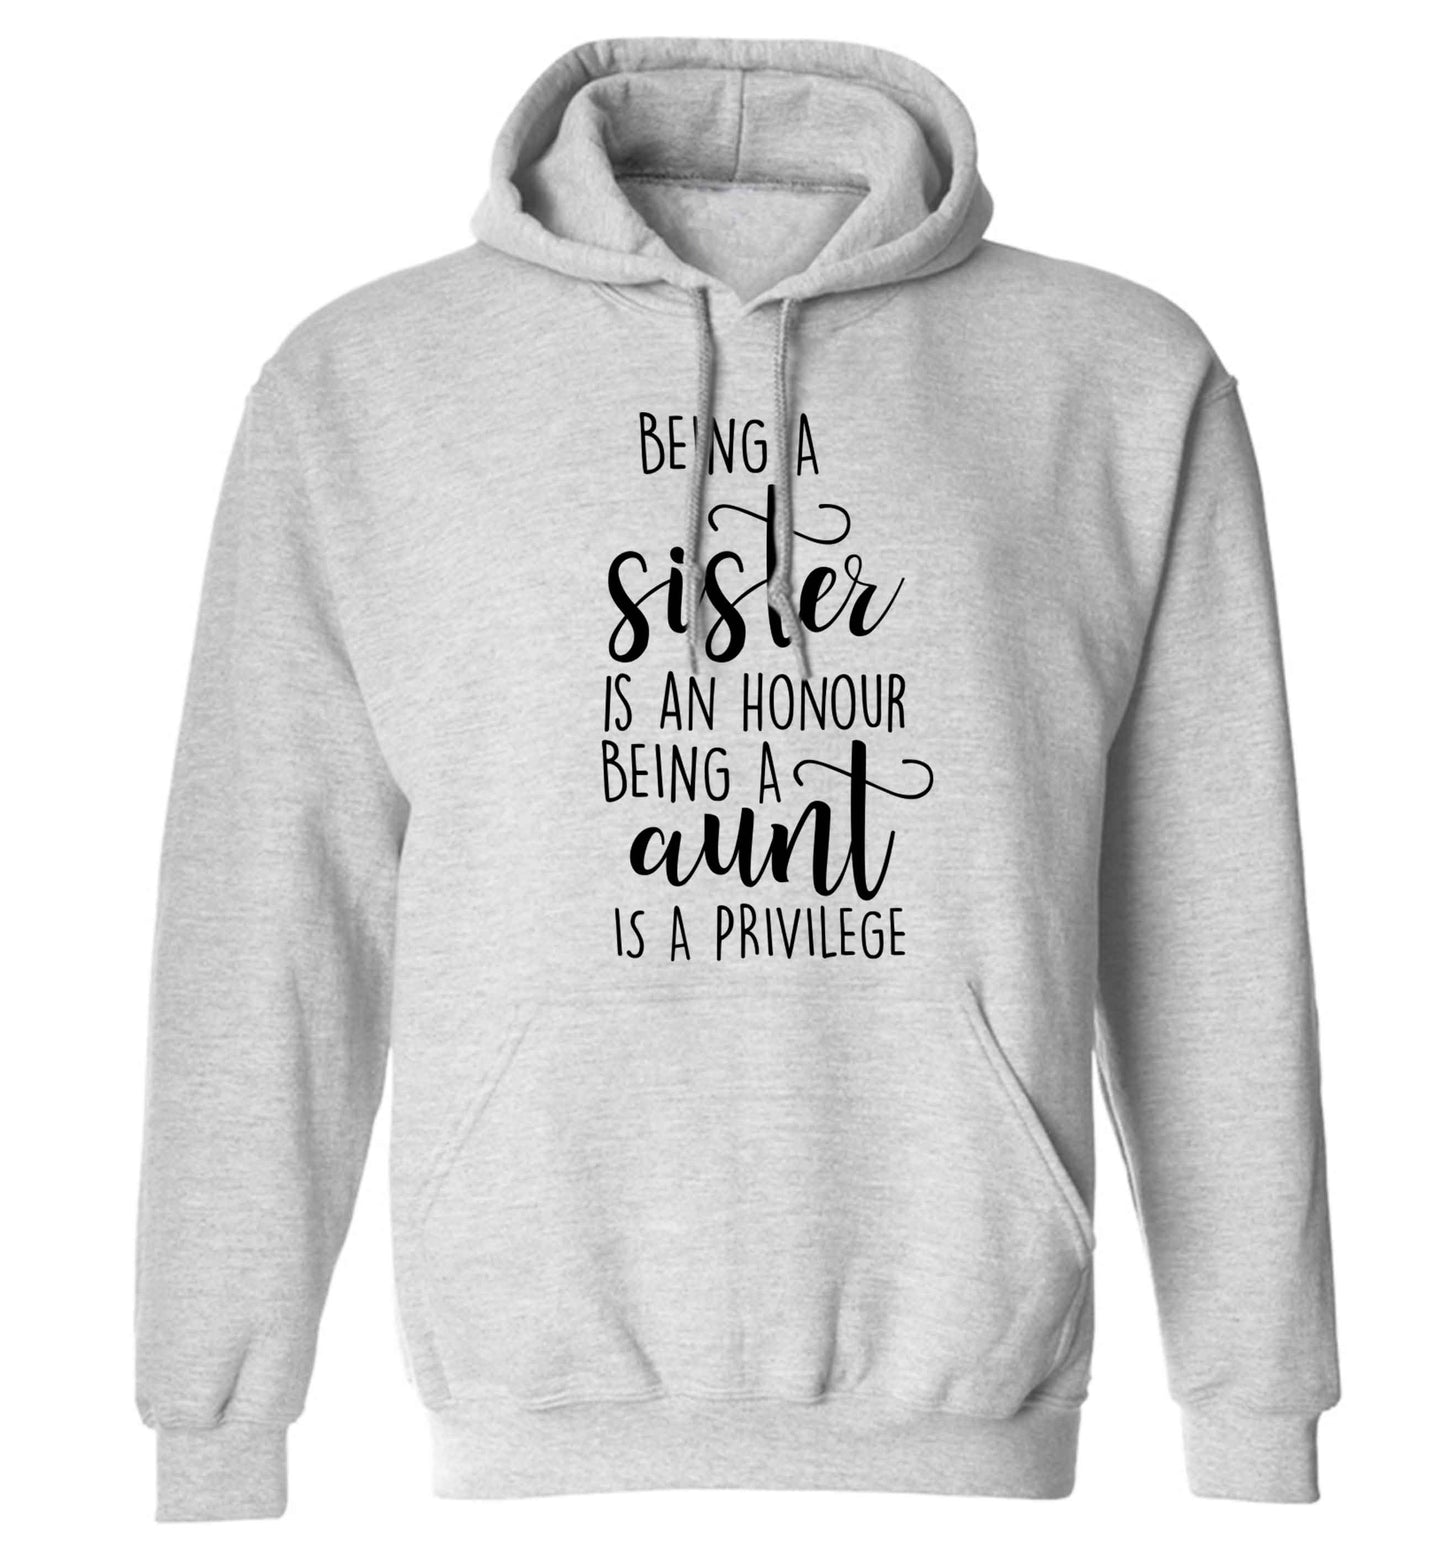 Being a sister is an honour being an auntie is a privilege adults unisex grey hoodie 2XL